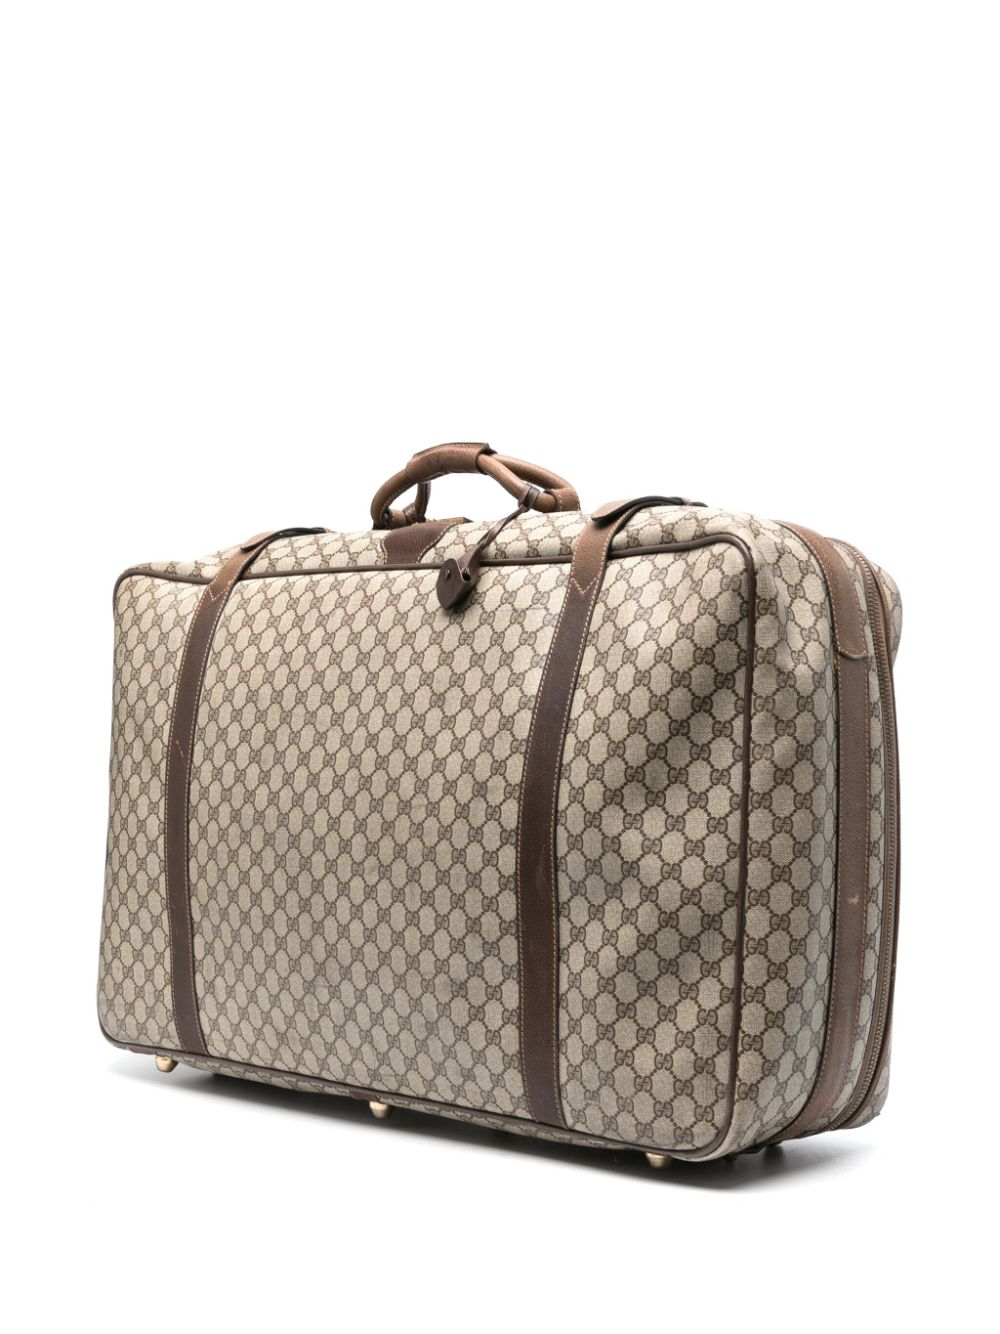 Gucci Pre-Owned 1980 GG canvas travel bag - Beige